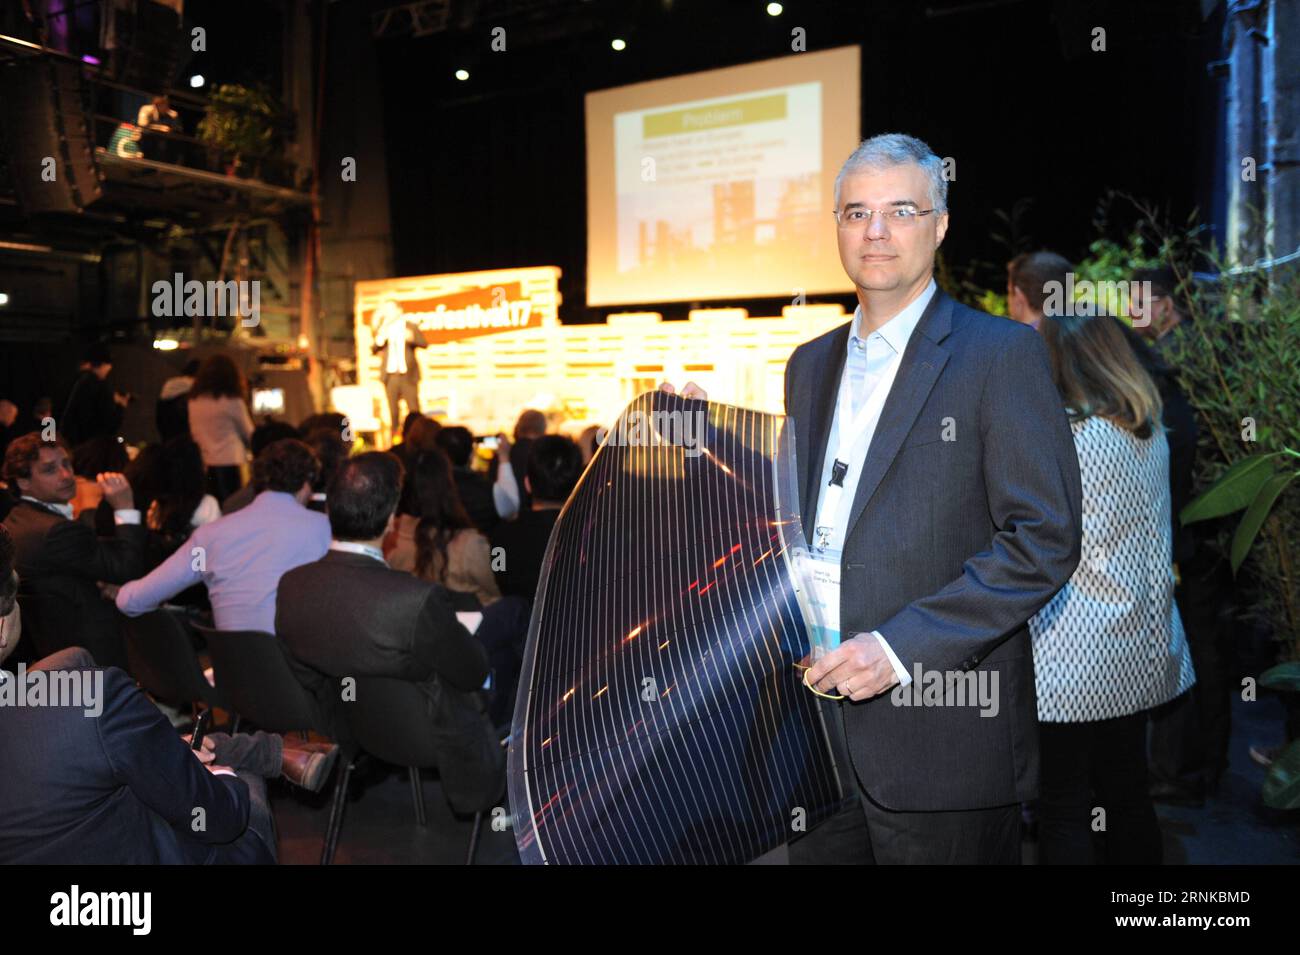 (170321) -- BERLIN, March 21, 2017 -- A finalist from Brazil shows a light-weight and cost-effecitve solar panel developed by his start-up enterprise during the first Start up Energy Transition Tech Festival, organized by the German Energy Agency (DENA) in Berlin, Germany, on March 20, 2017. ) (zjy) GERMANY-BERLIN-START UP ENERGY TRANSITION AWARD YanxFeng PUBLICATIONxNOTxINxCHN   Berlin March 21 2017 a Finalist from Brazil Shows a Light Weight and Cost  Solar Panel Developed by His Start up Enterprise during The First Start up Energy TRANSITION Tech Festival Organized by The German Energy Agen Stock Photo